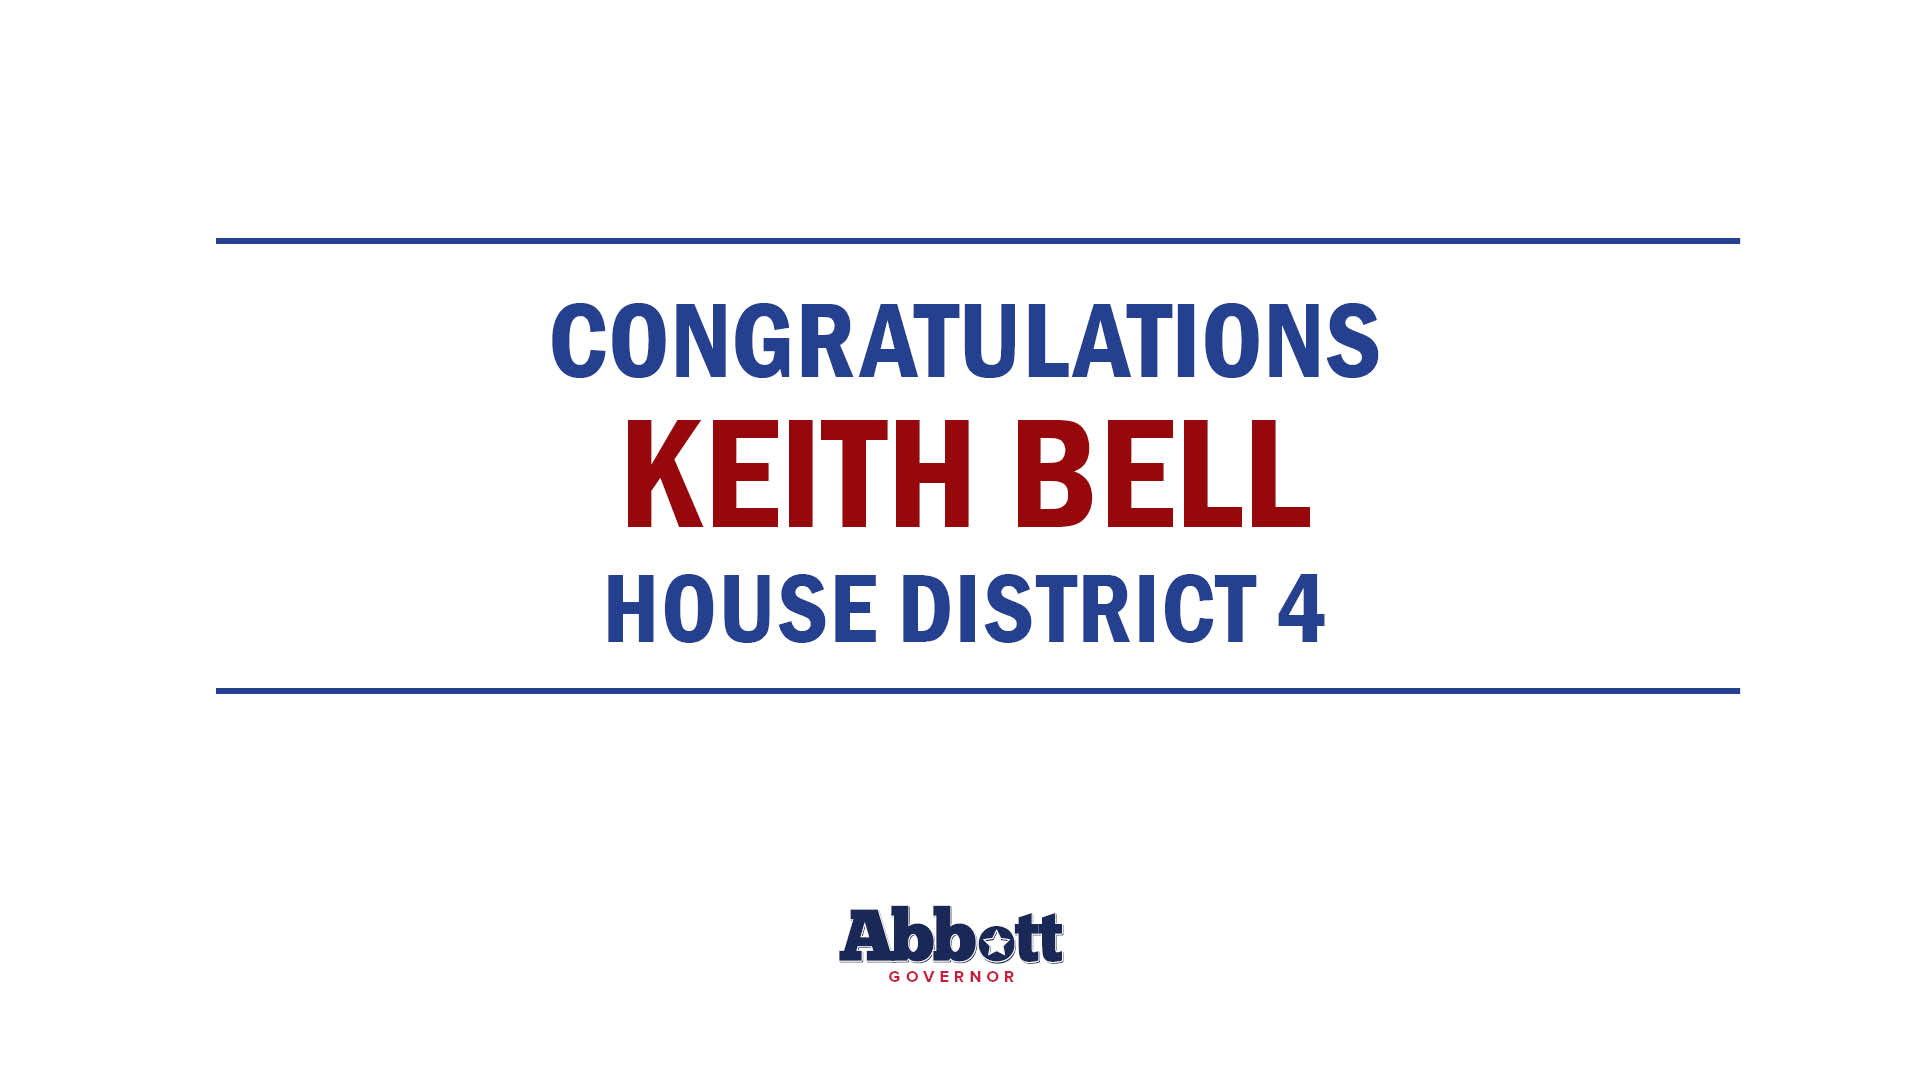 Governor Abbott Congratulates Keith Bell on Re-Election Victory